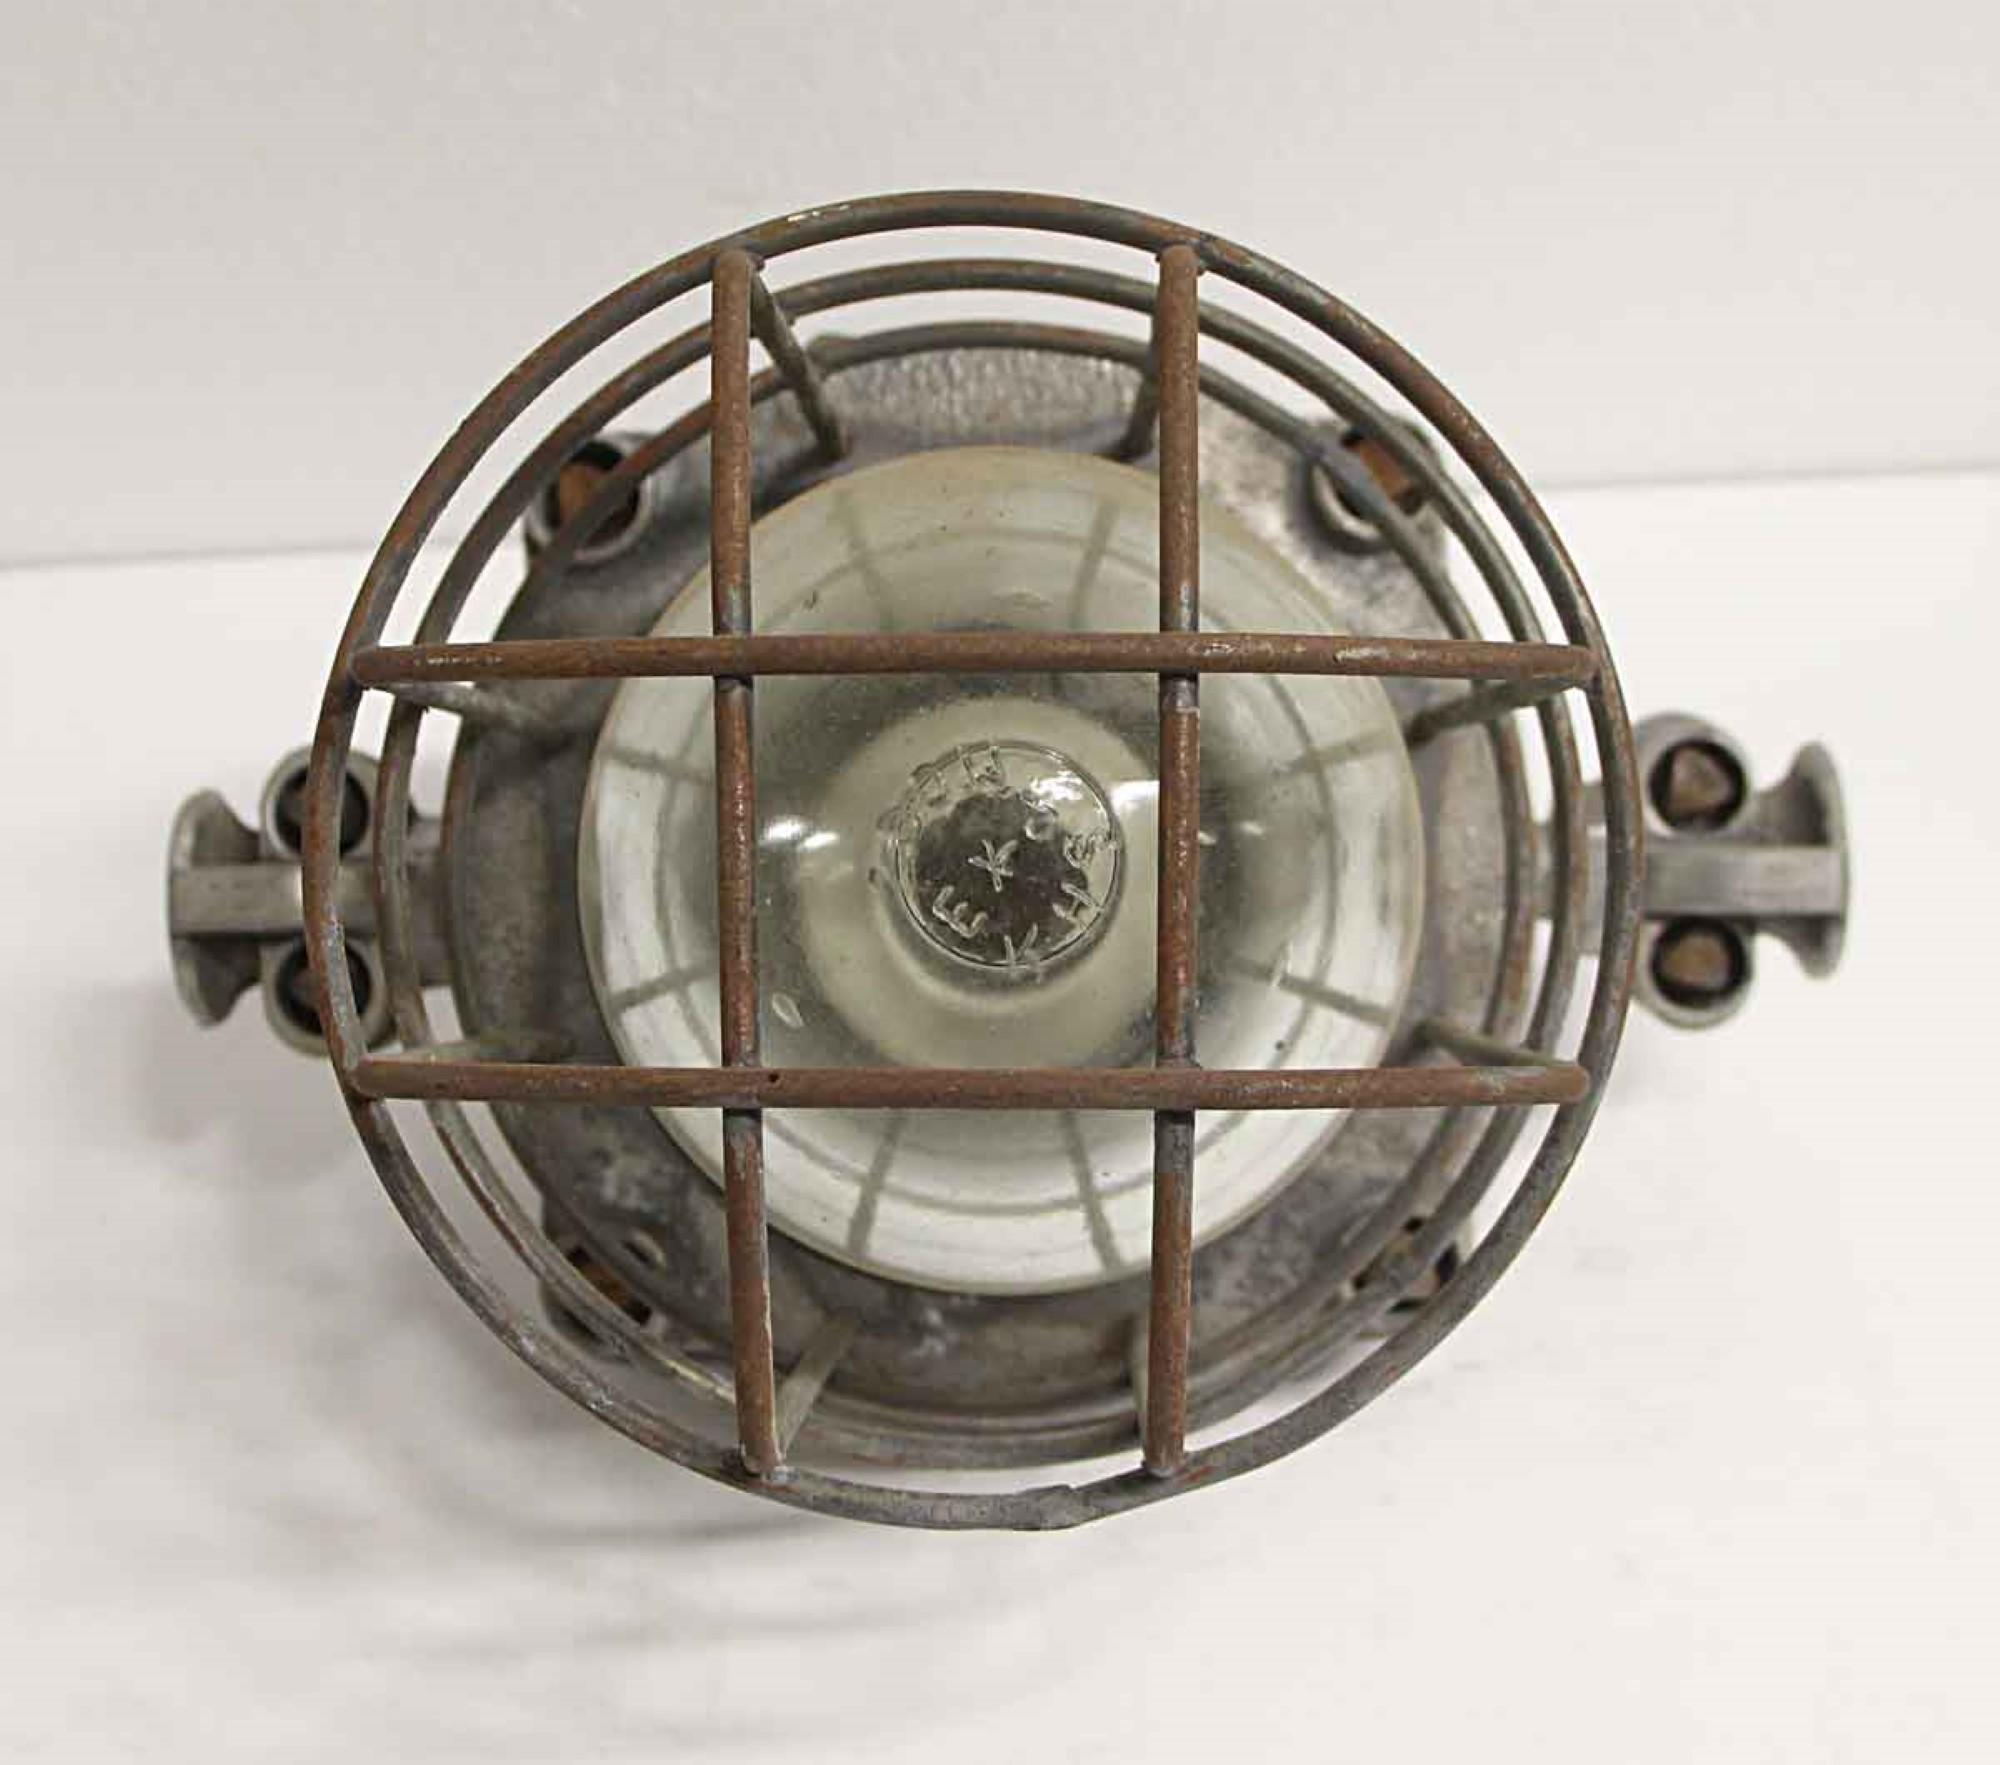 1940s nautical or Industrial style metal ship light with caged glass. Price includes restoration. This can be seen at our 400 Gilligan St location in Scranton. PA.